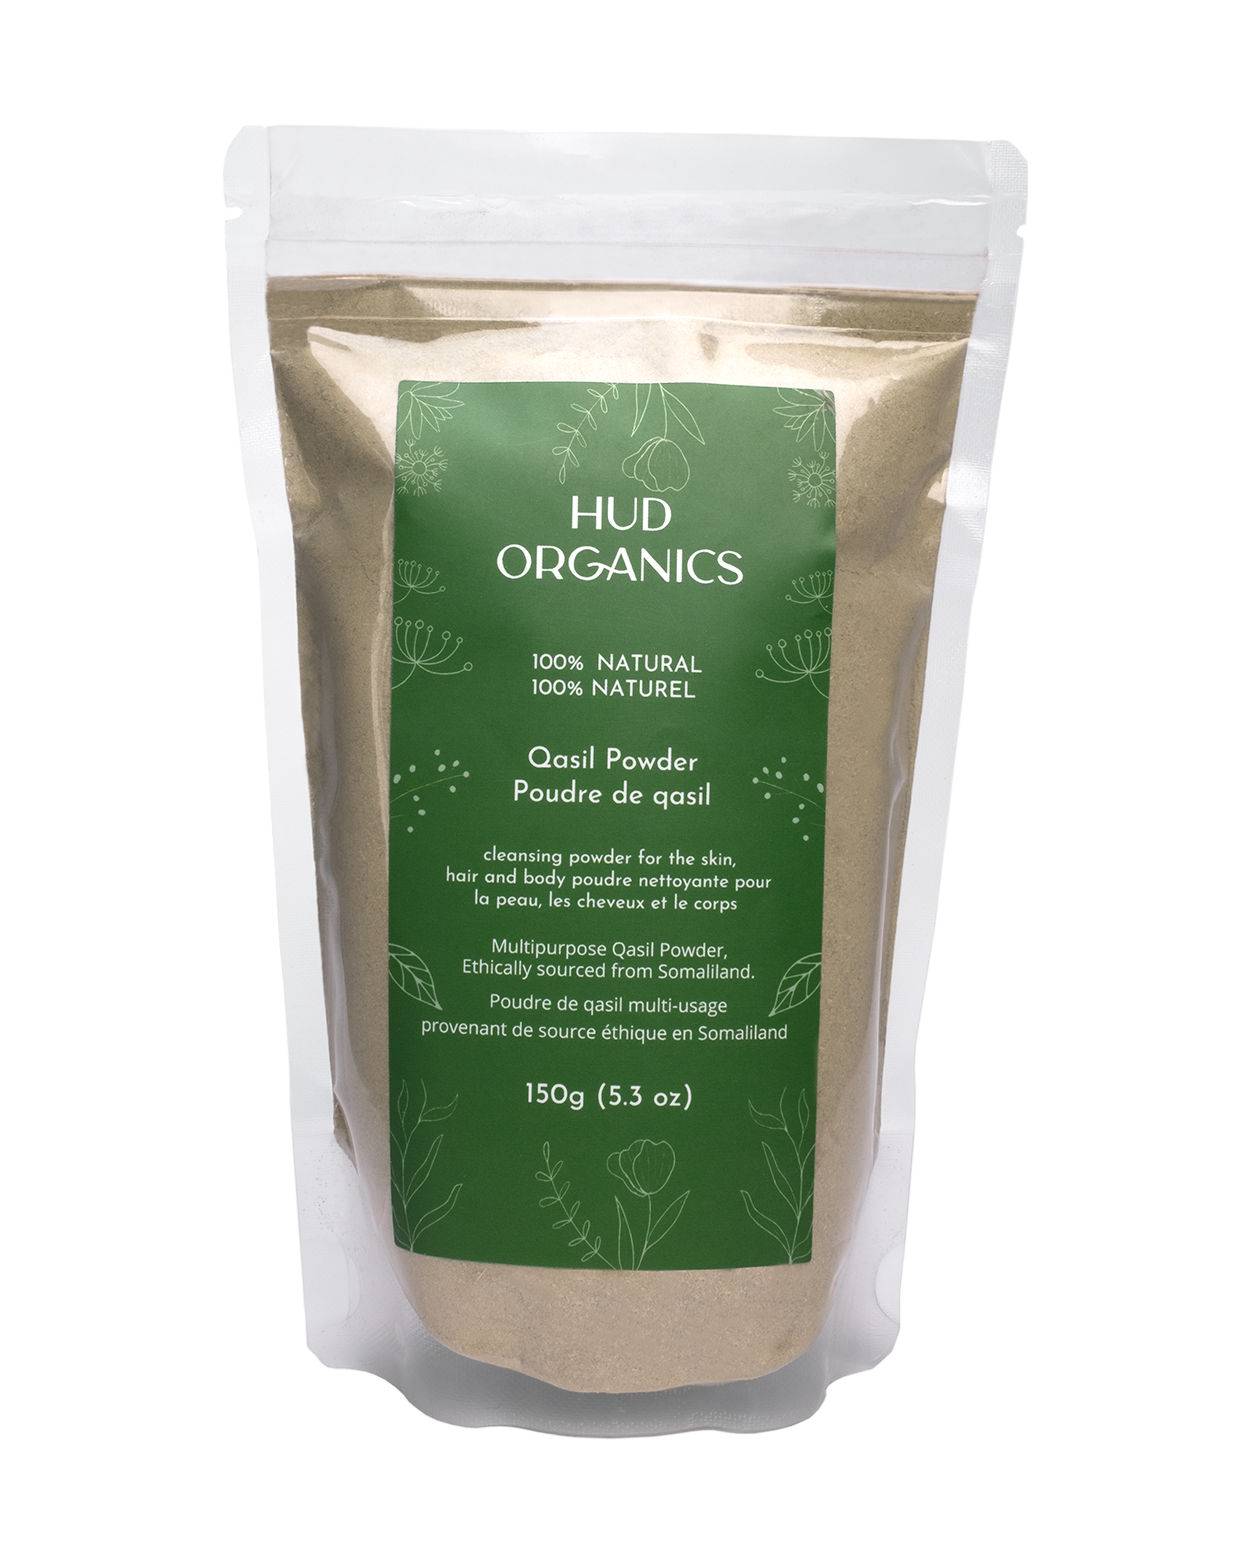 Qasil Organics - Qasil Organics 'Qasil powder' is now available via our  website www.qasilorganics.com. This cleansing powder is 100% natural and  can be used as an alternative to facial cleanser/soap or used